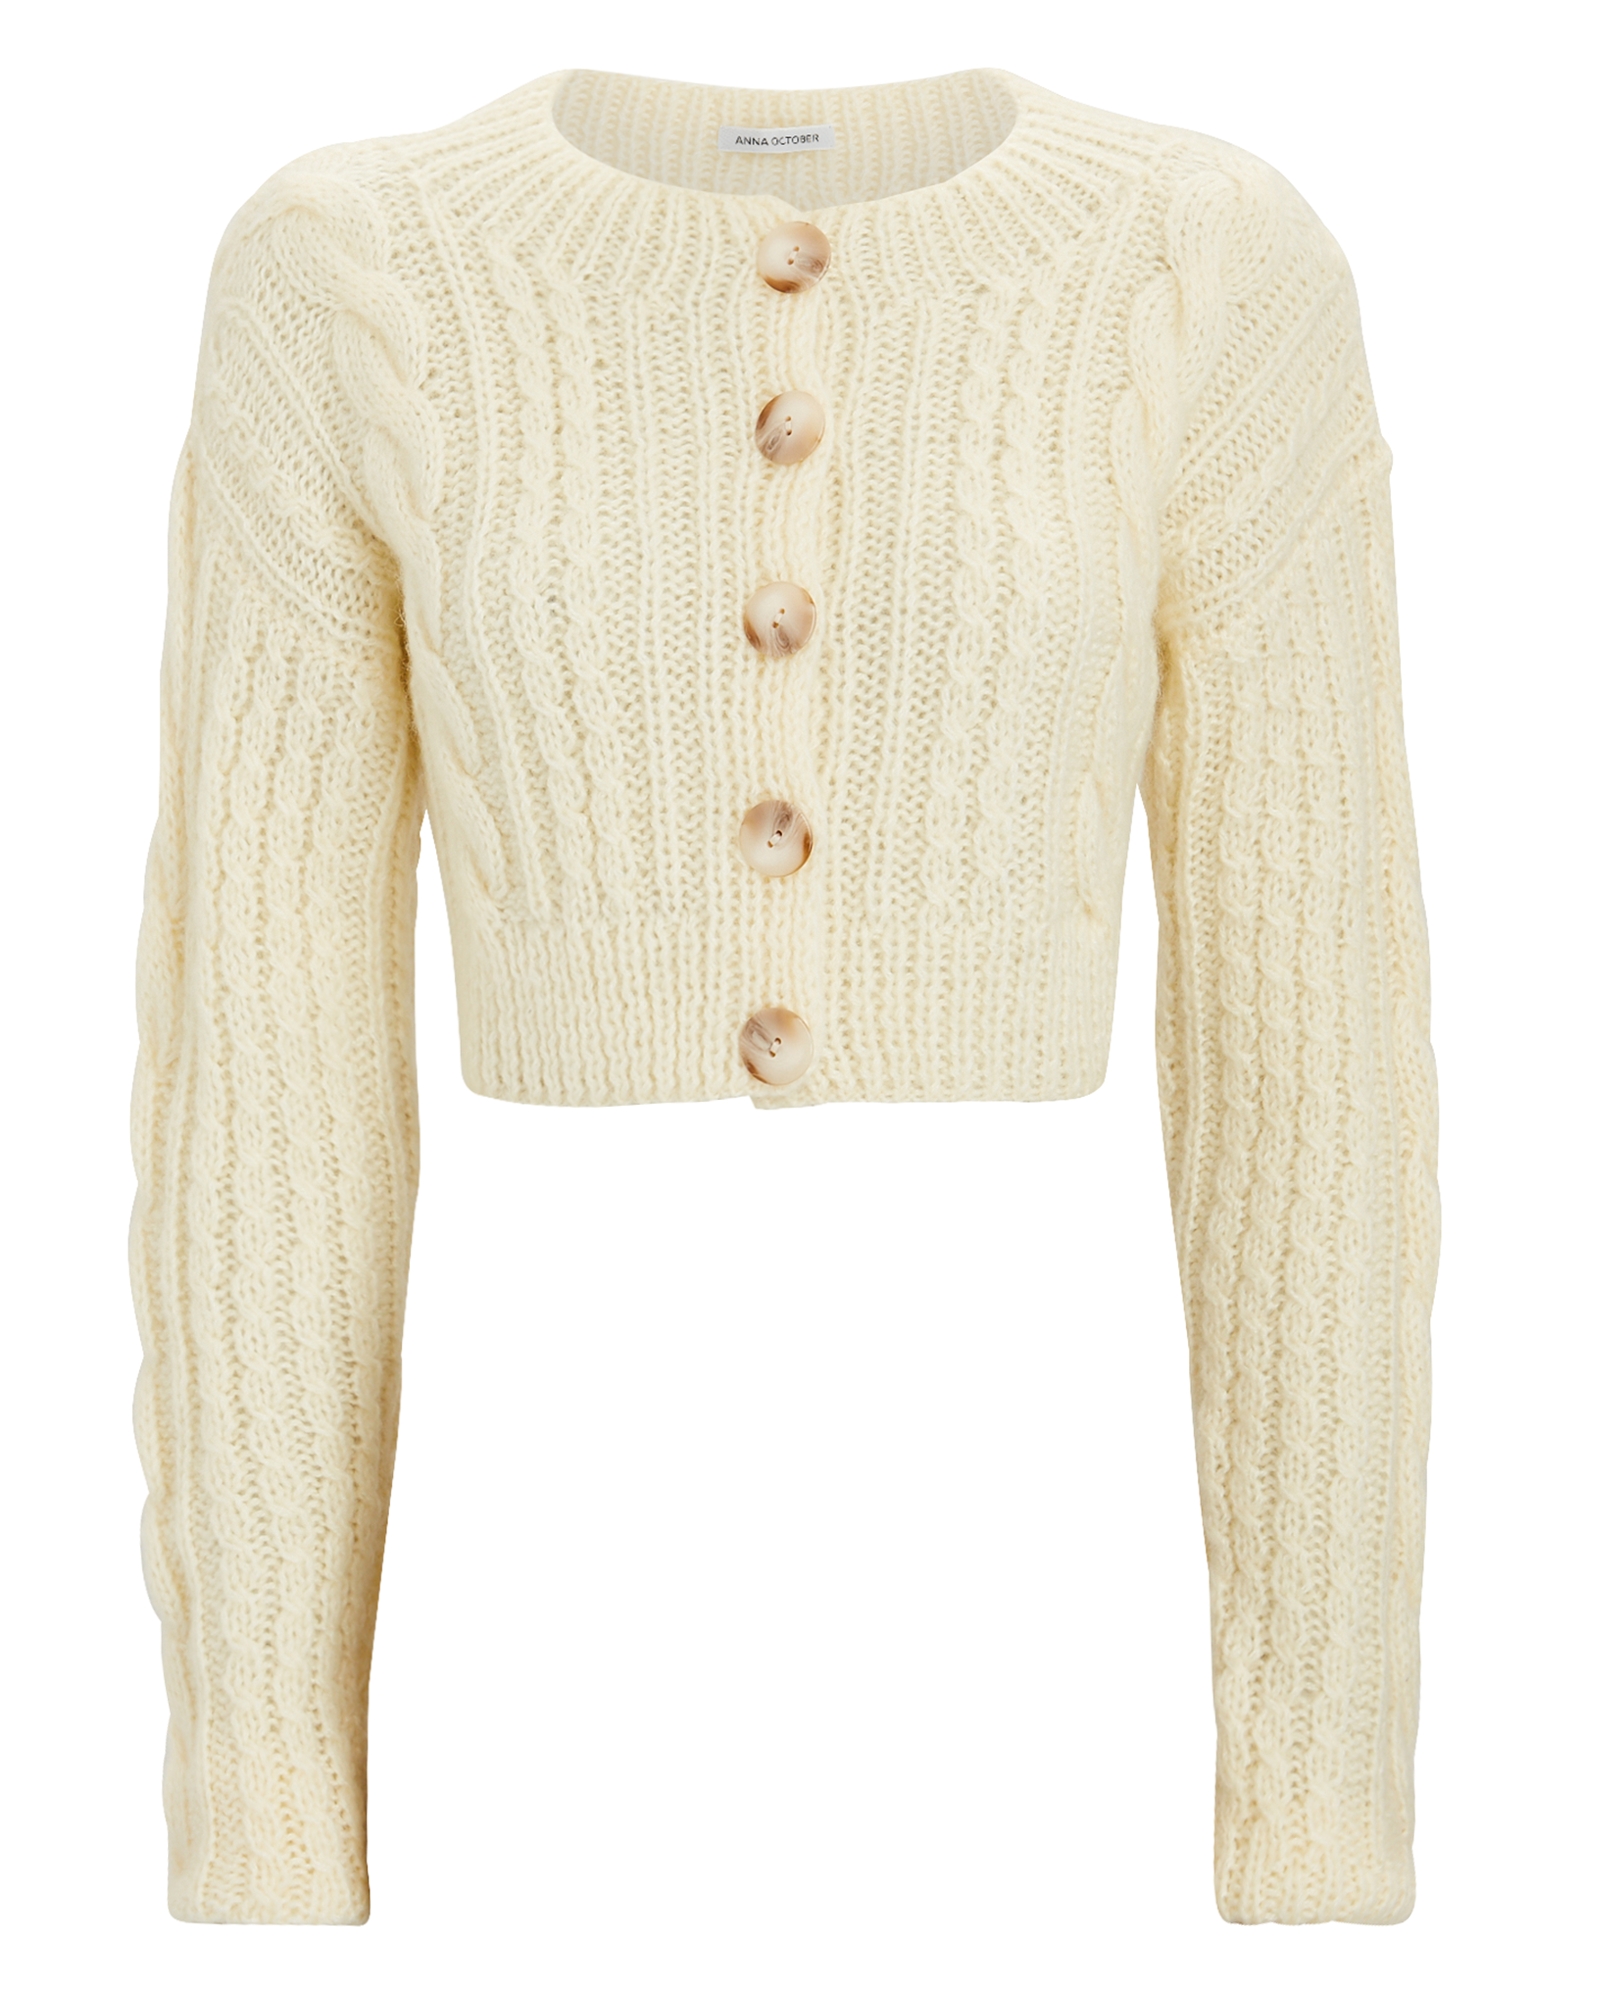 Anna October Cropped Cable Knit Cardigan | INTERMIX®